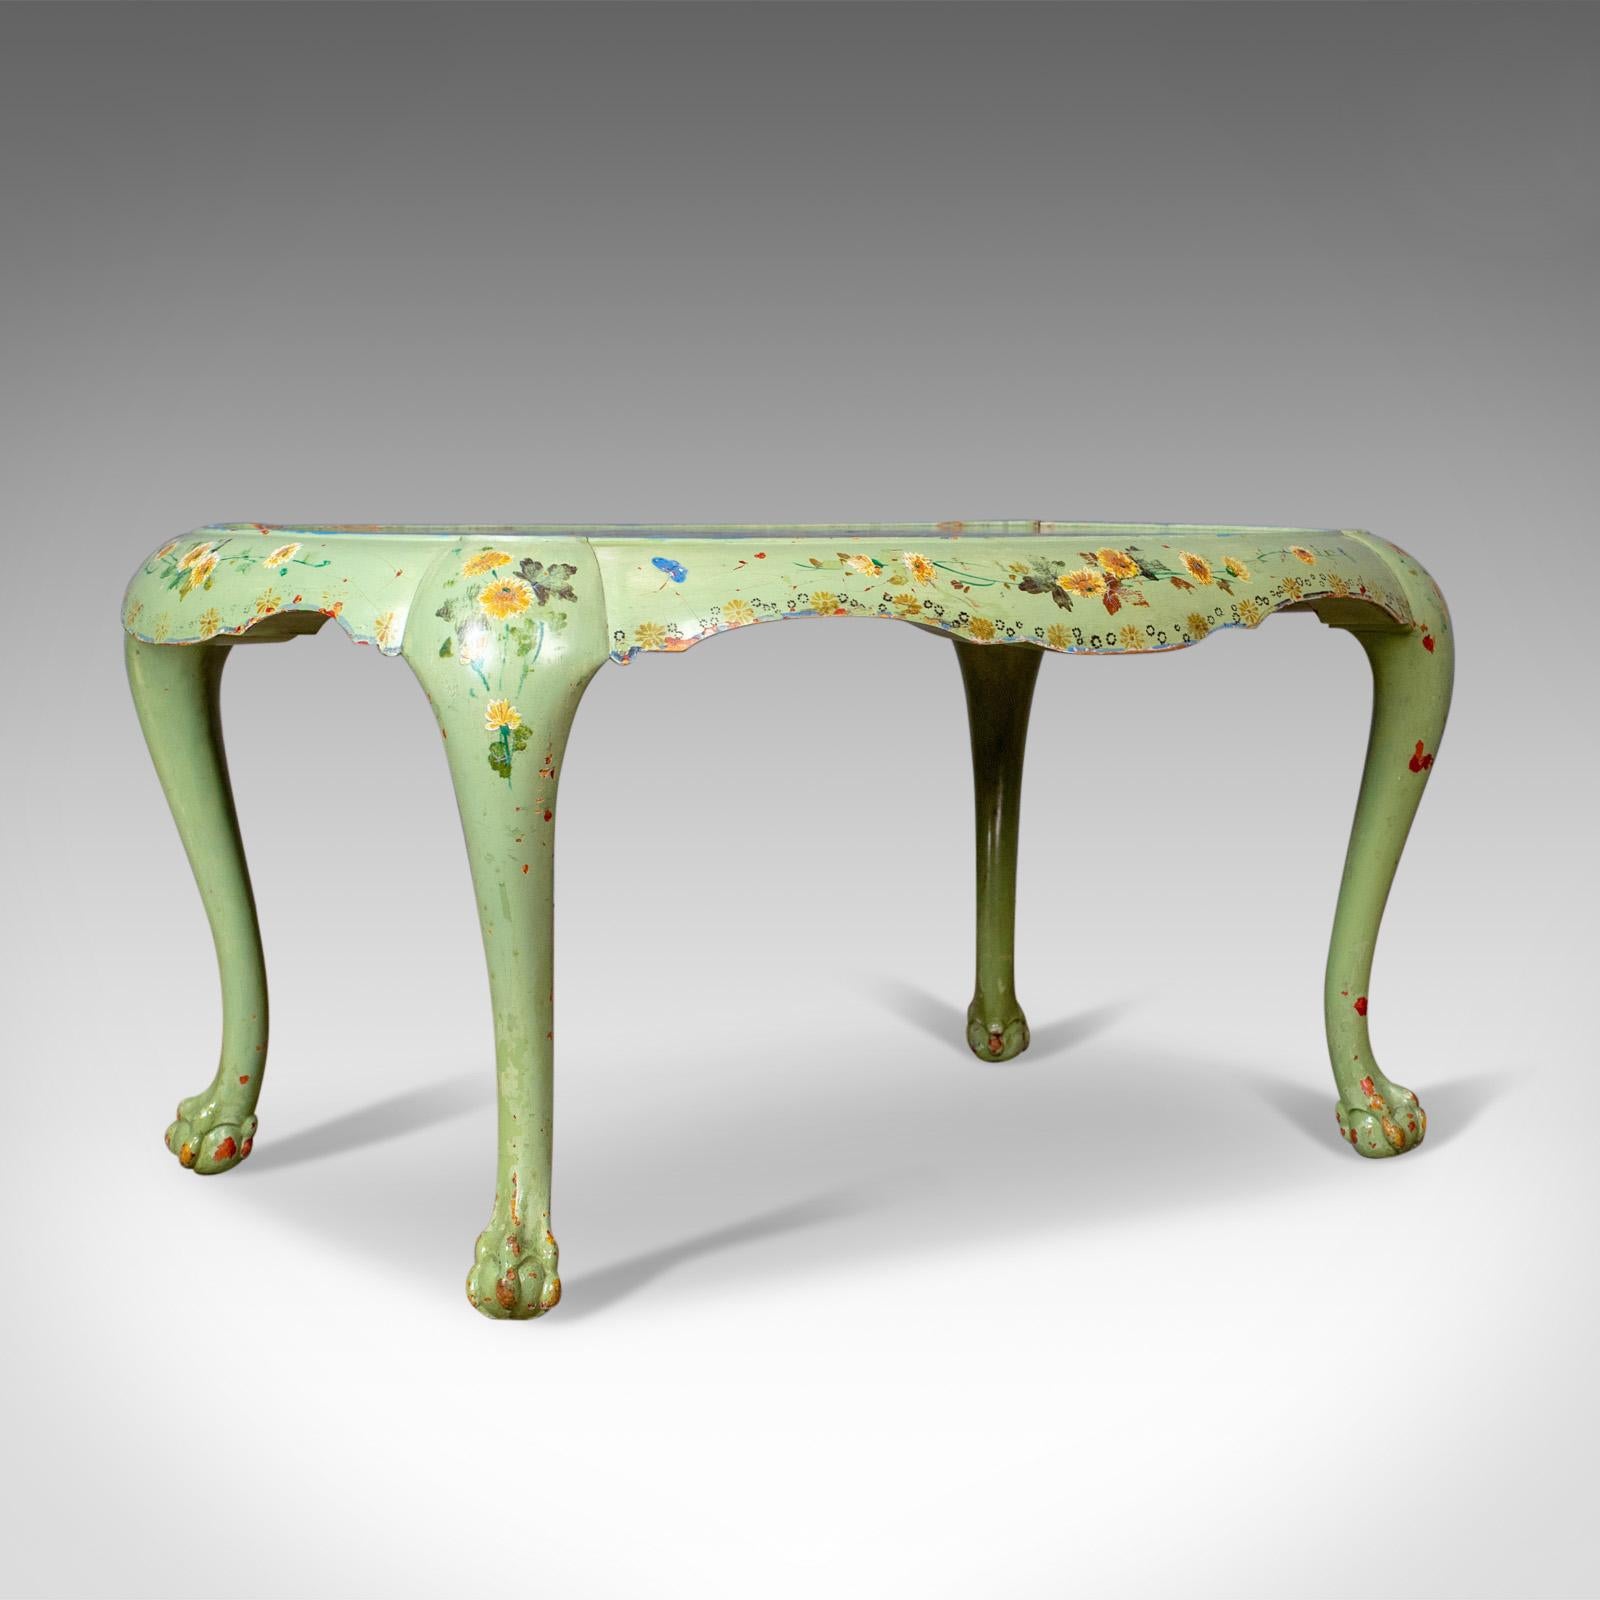 This is an antique side table, a French, country, hand painted coffee table dating to the early 20th century circa 1910.

Attractive, hand-painted French side table
Decorated with flowers, foliage and butterflies on a pale green ground
Ovular